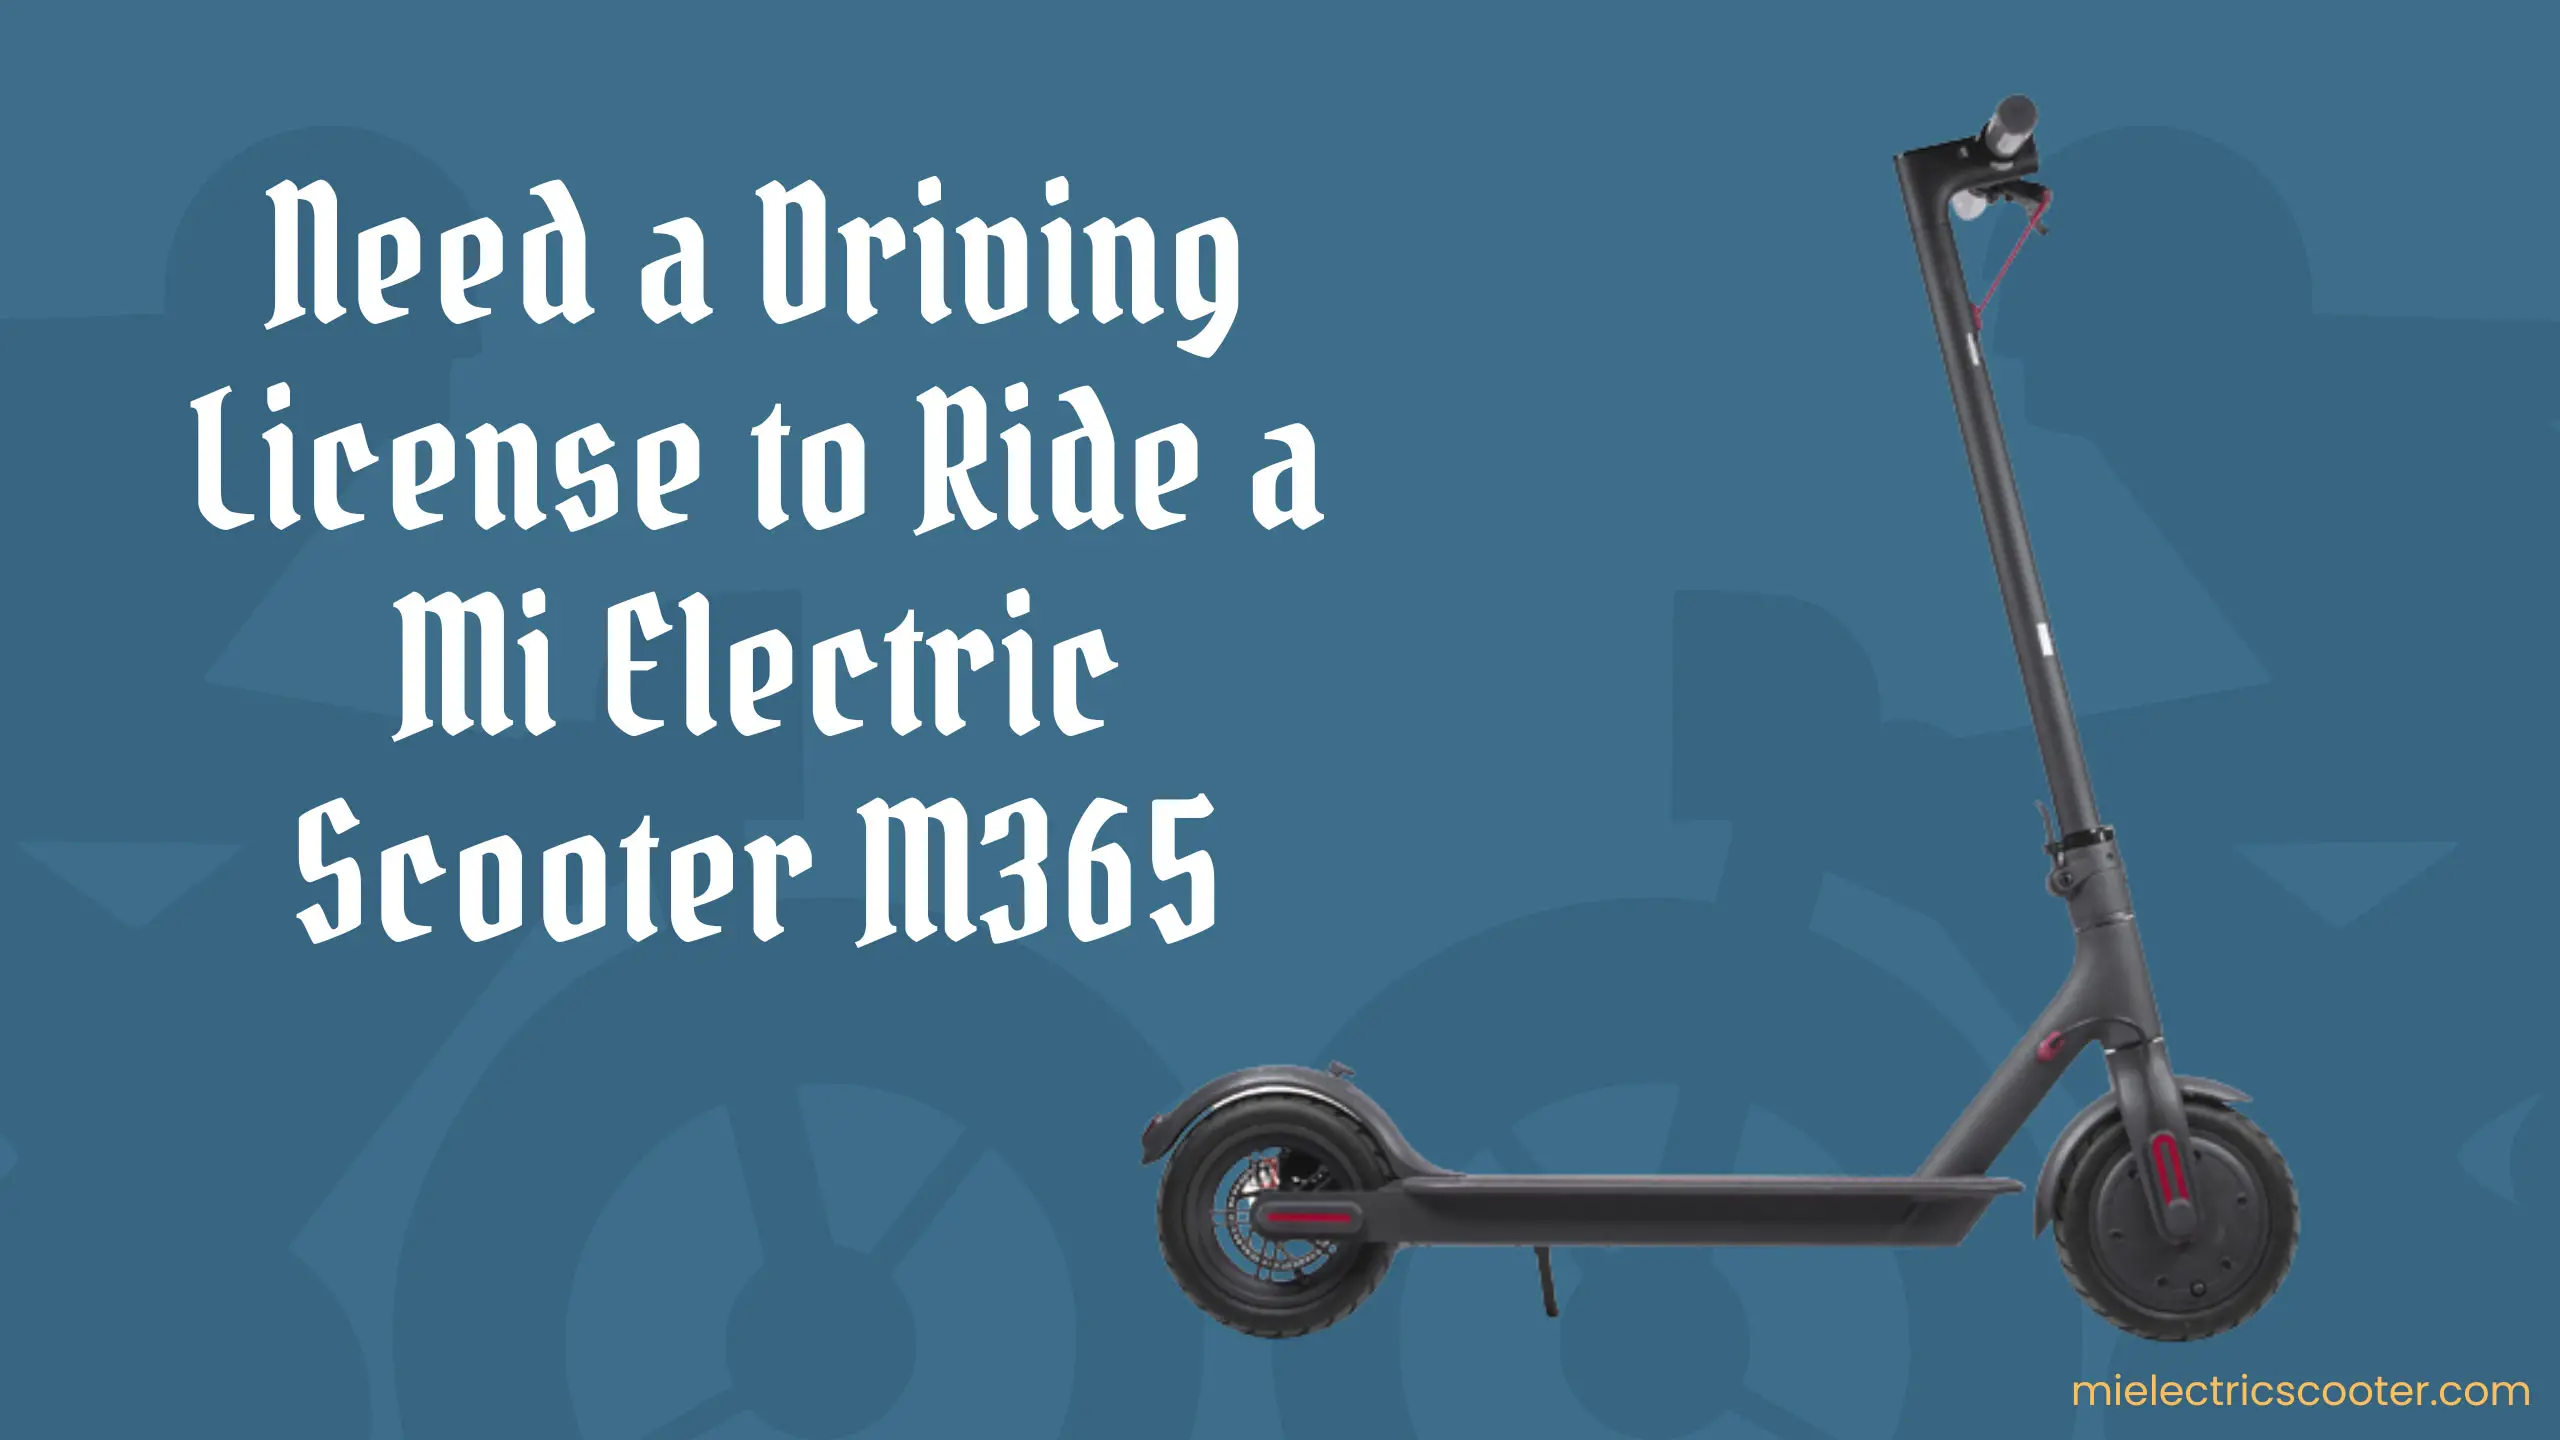 Do You Need Driving License to Ride a Mi Electric - Mi Electric Scooter